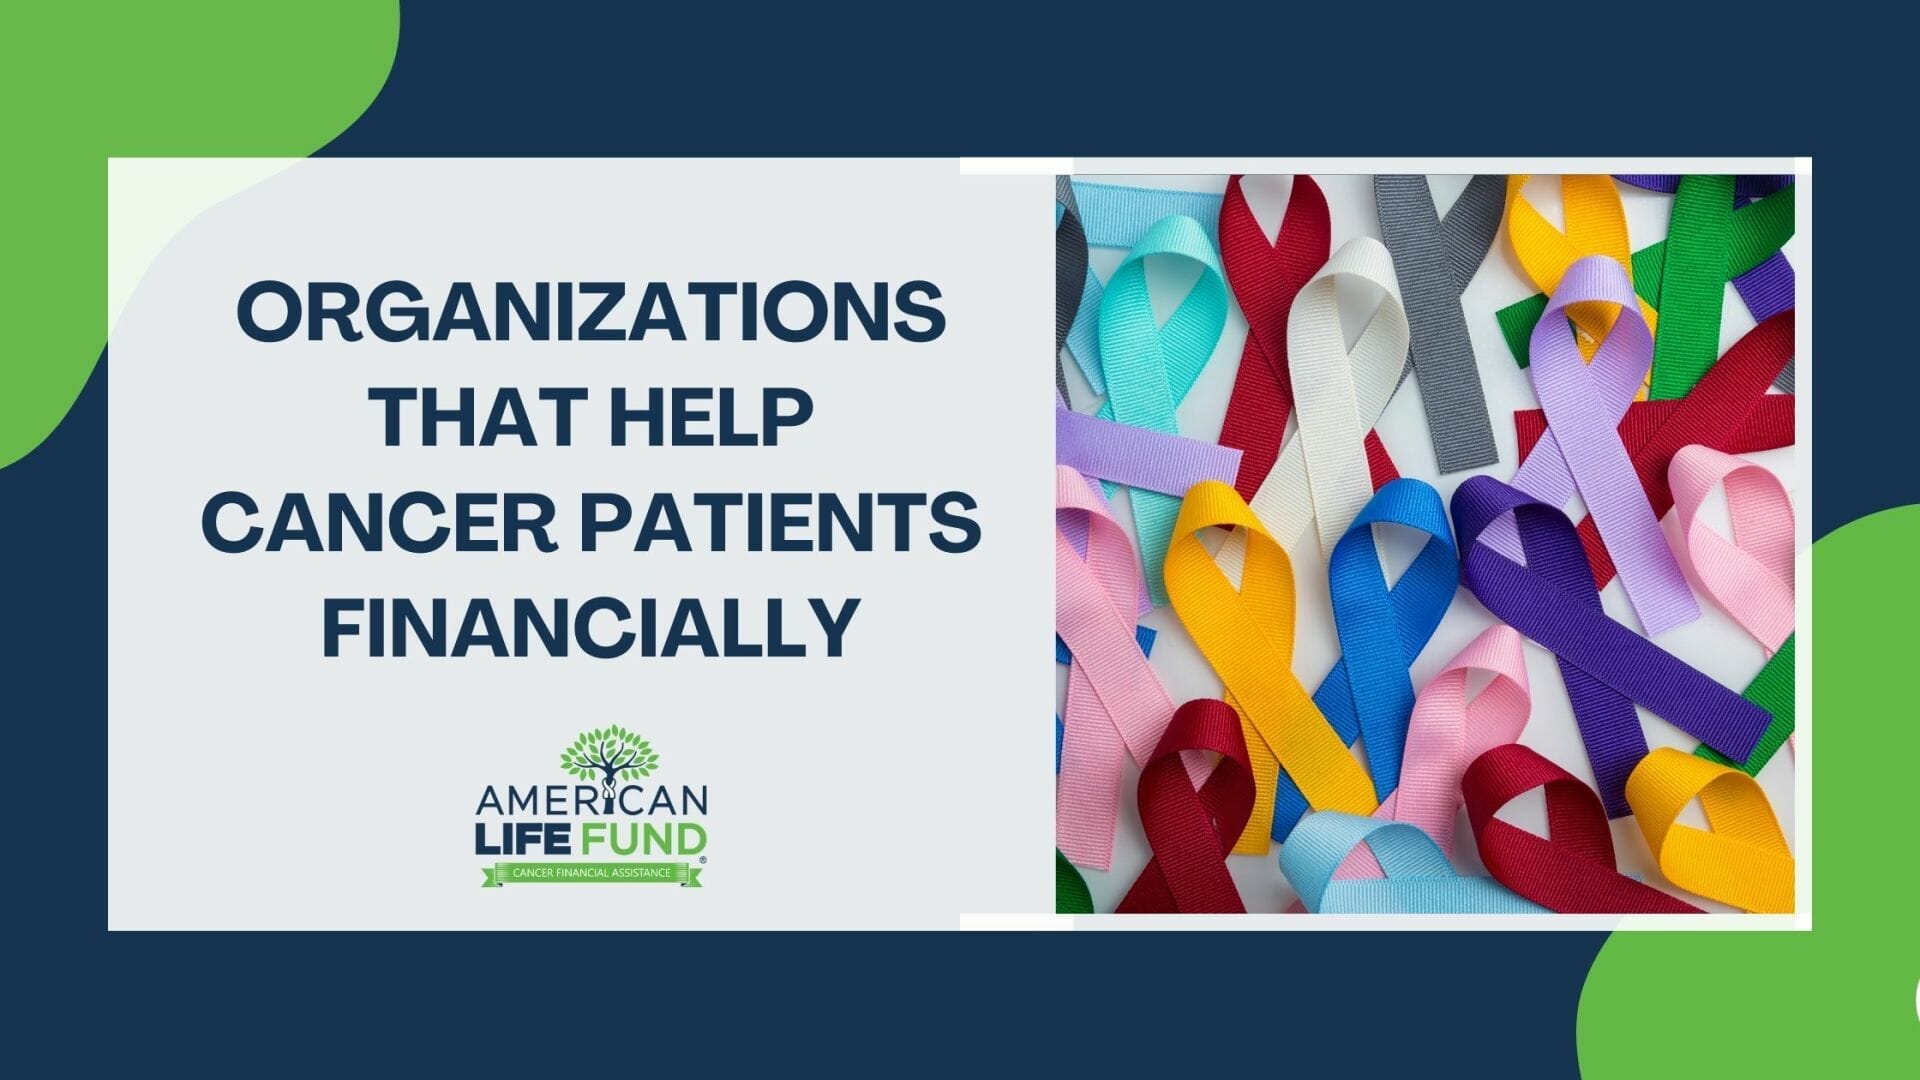 Financial Help for Cancer Patients: Free Resources to Offset Costs